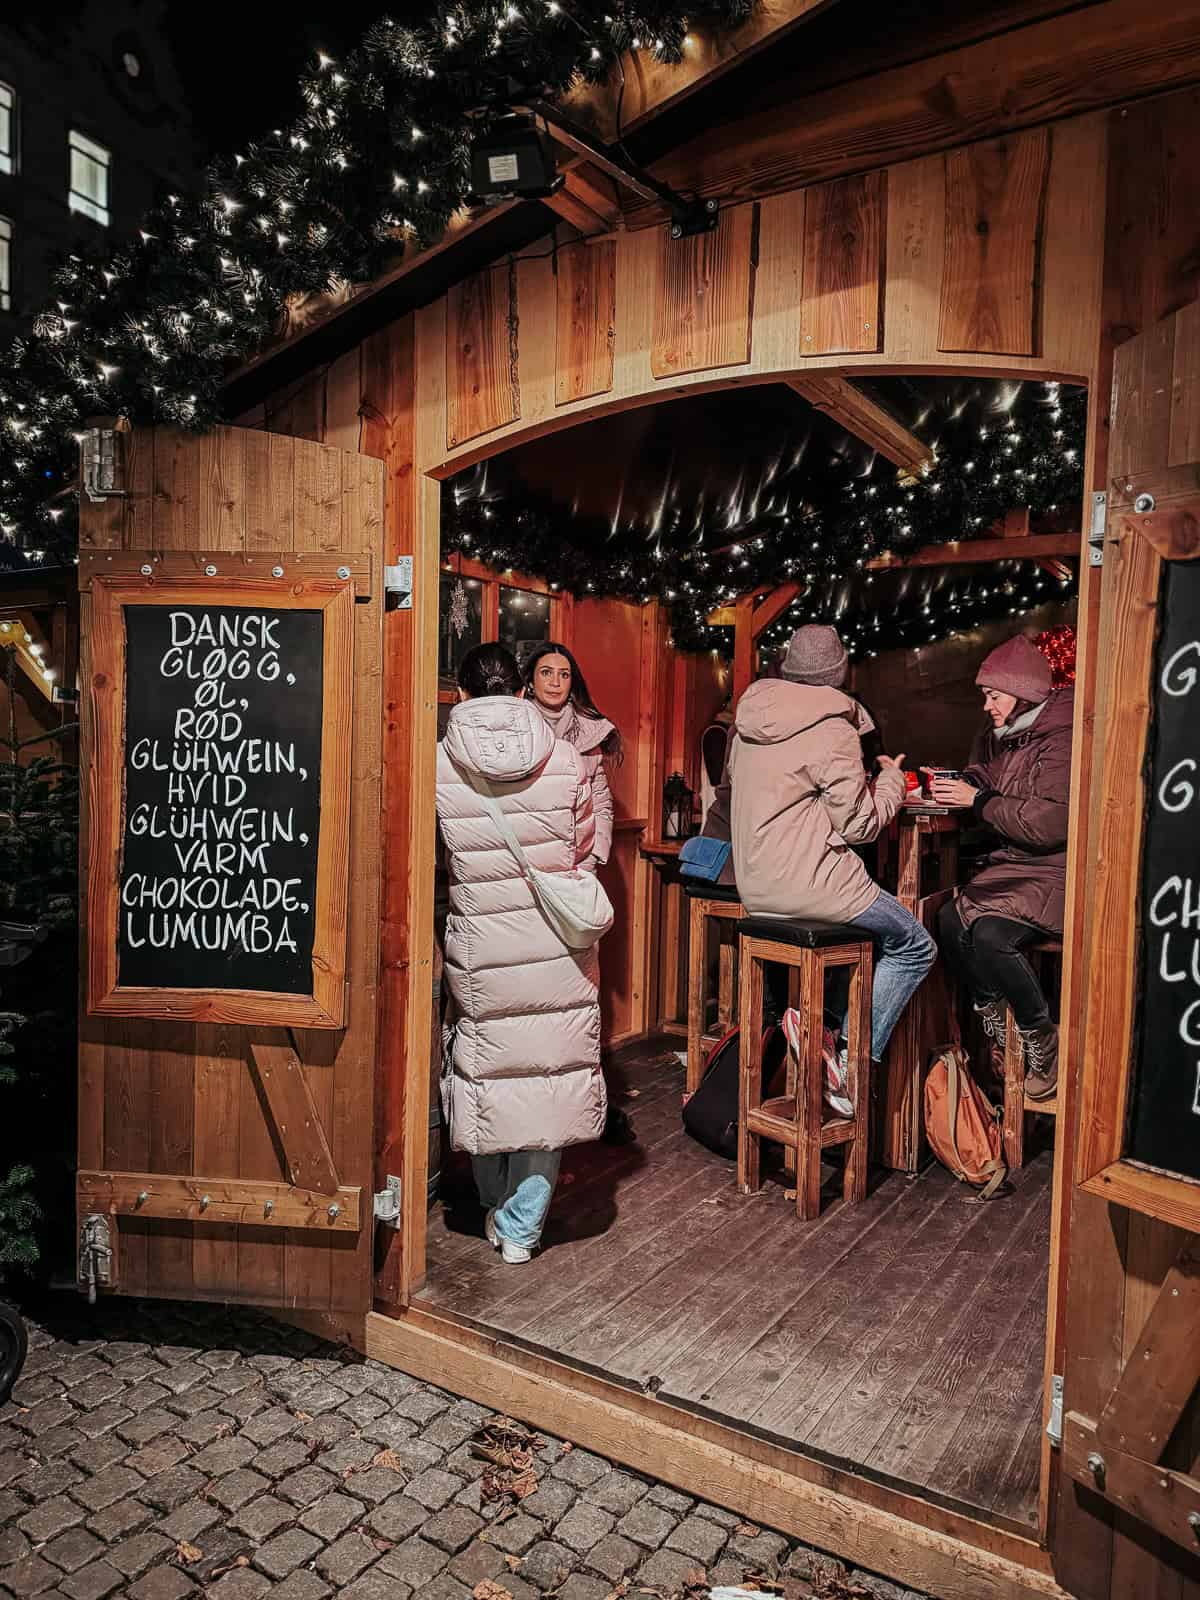 Patrons inside a cozy, wooden cabin at a Christmas market, illuminated by fairy lights and offering traditional winter drinks, as per the signage.